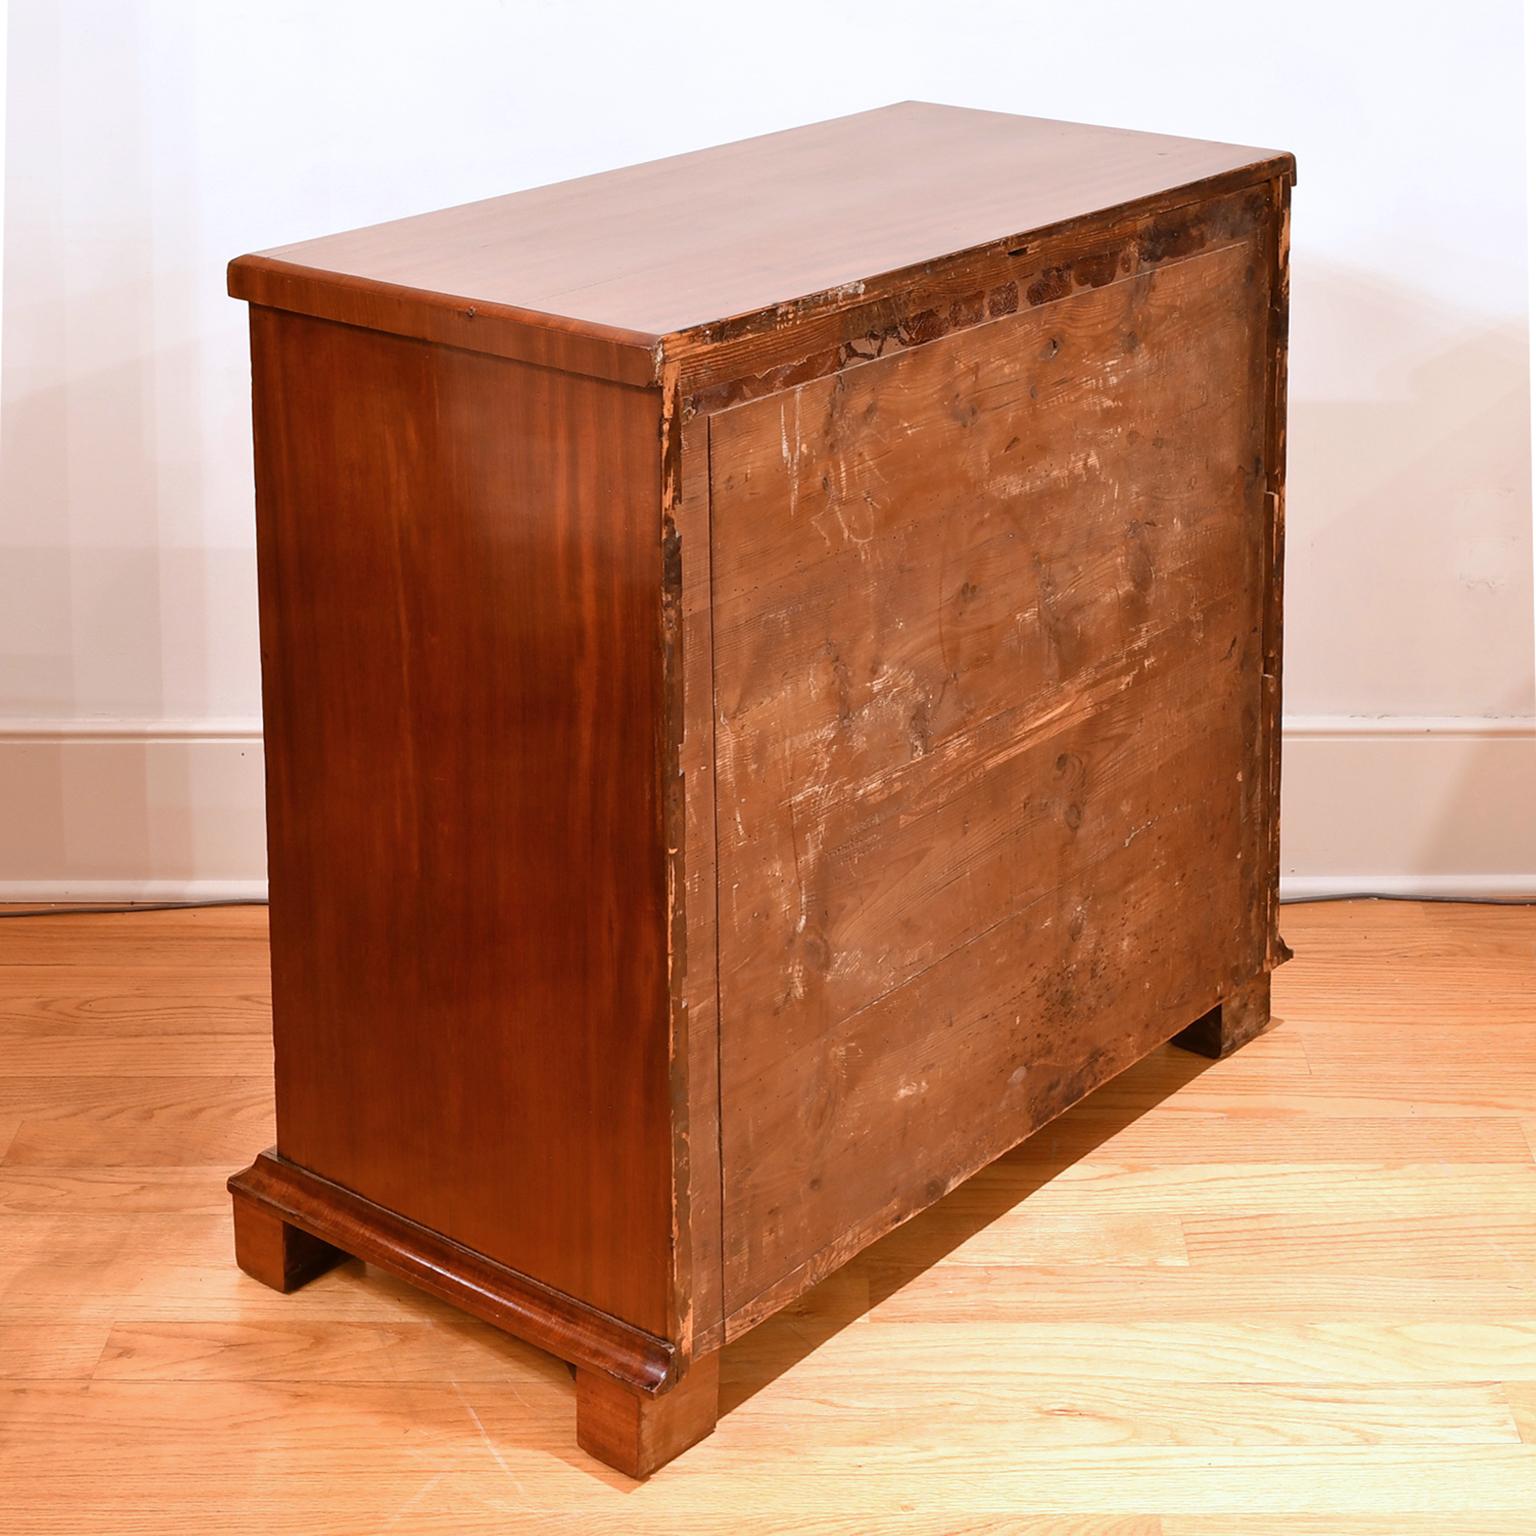 Antique Empire/ Biedermeier Chest of Drawers in West Indies Mahogany, c. 1825 For Sale 7